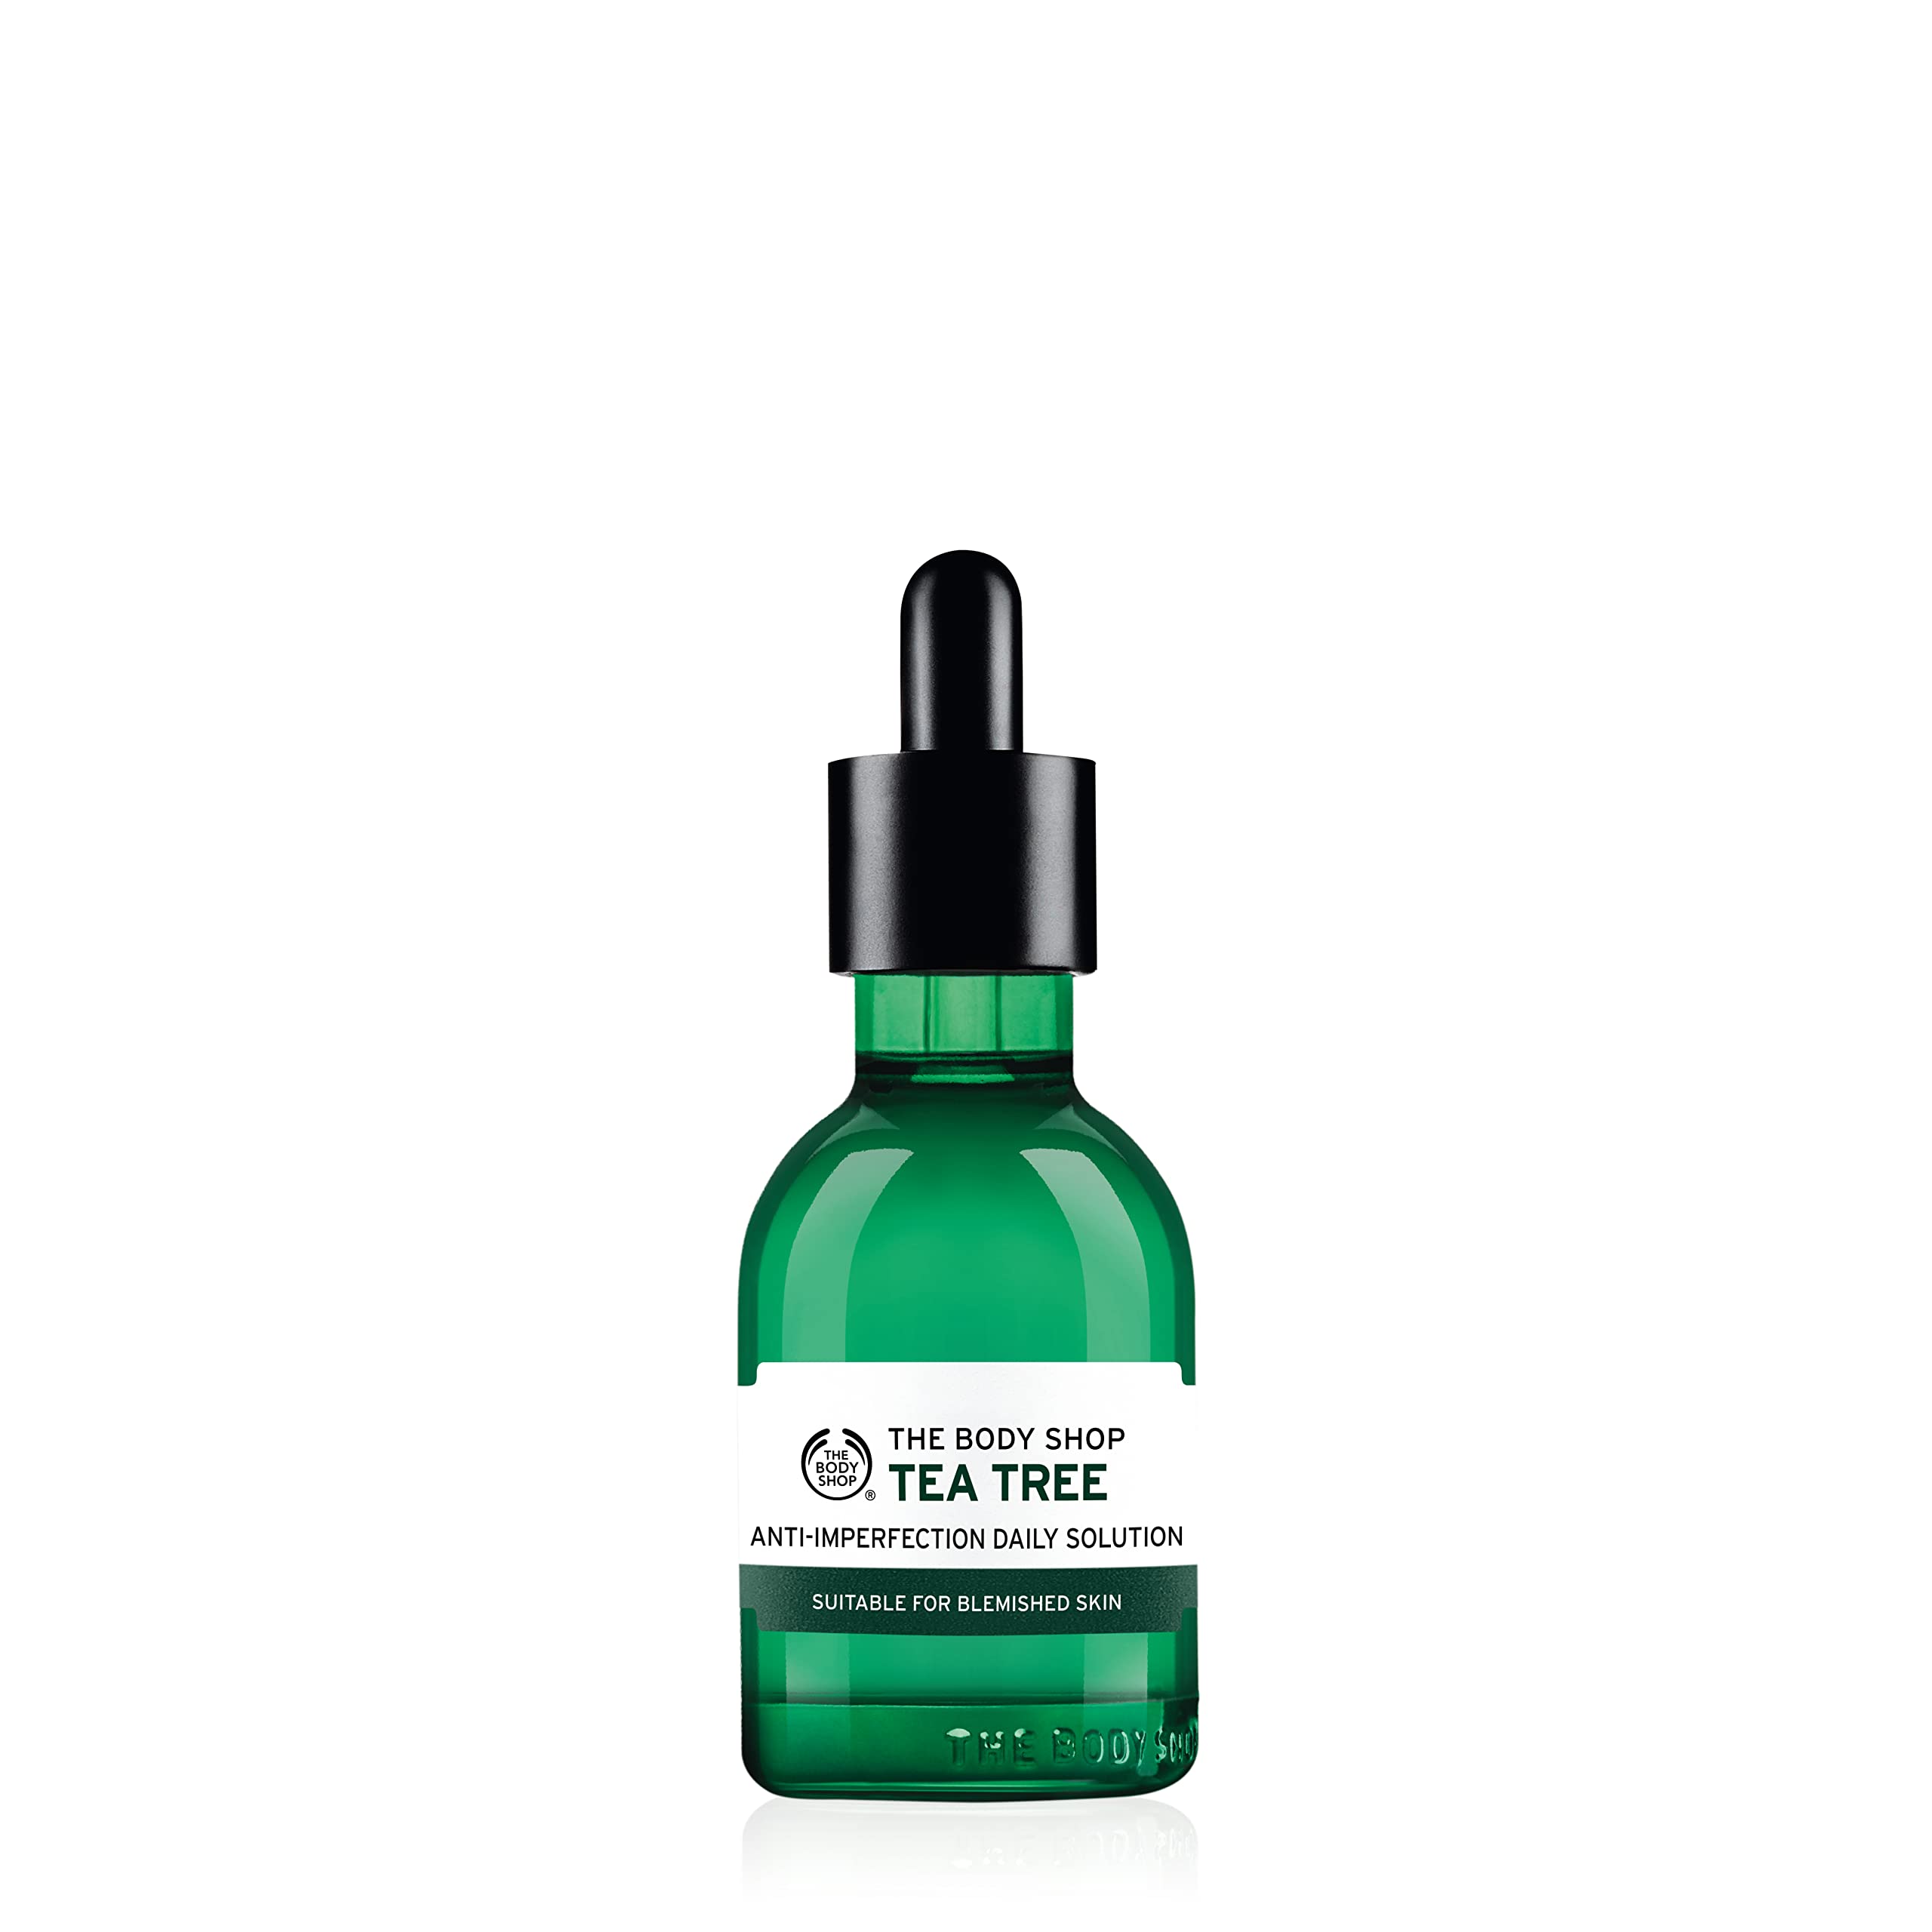 The Body Shop Tea Tree Anti-Imperfection Daily Solution, 50ml